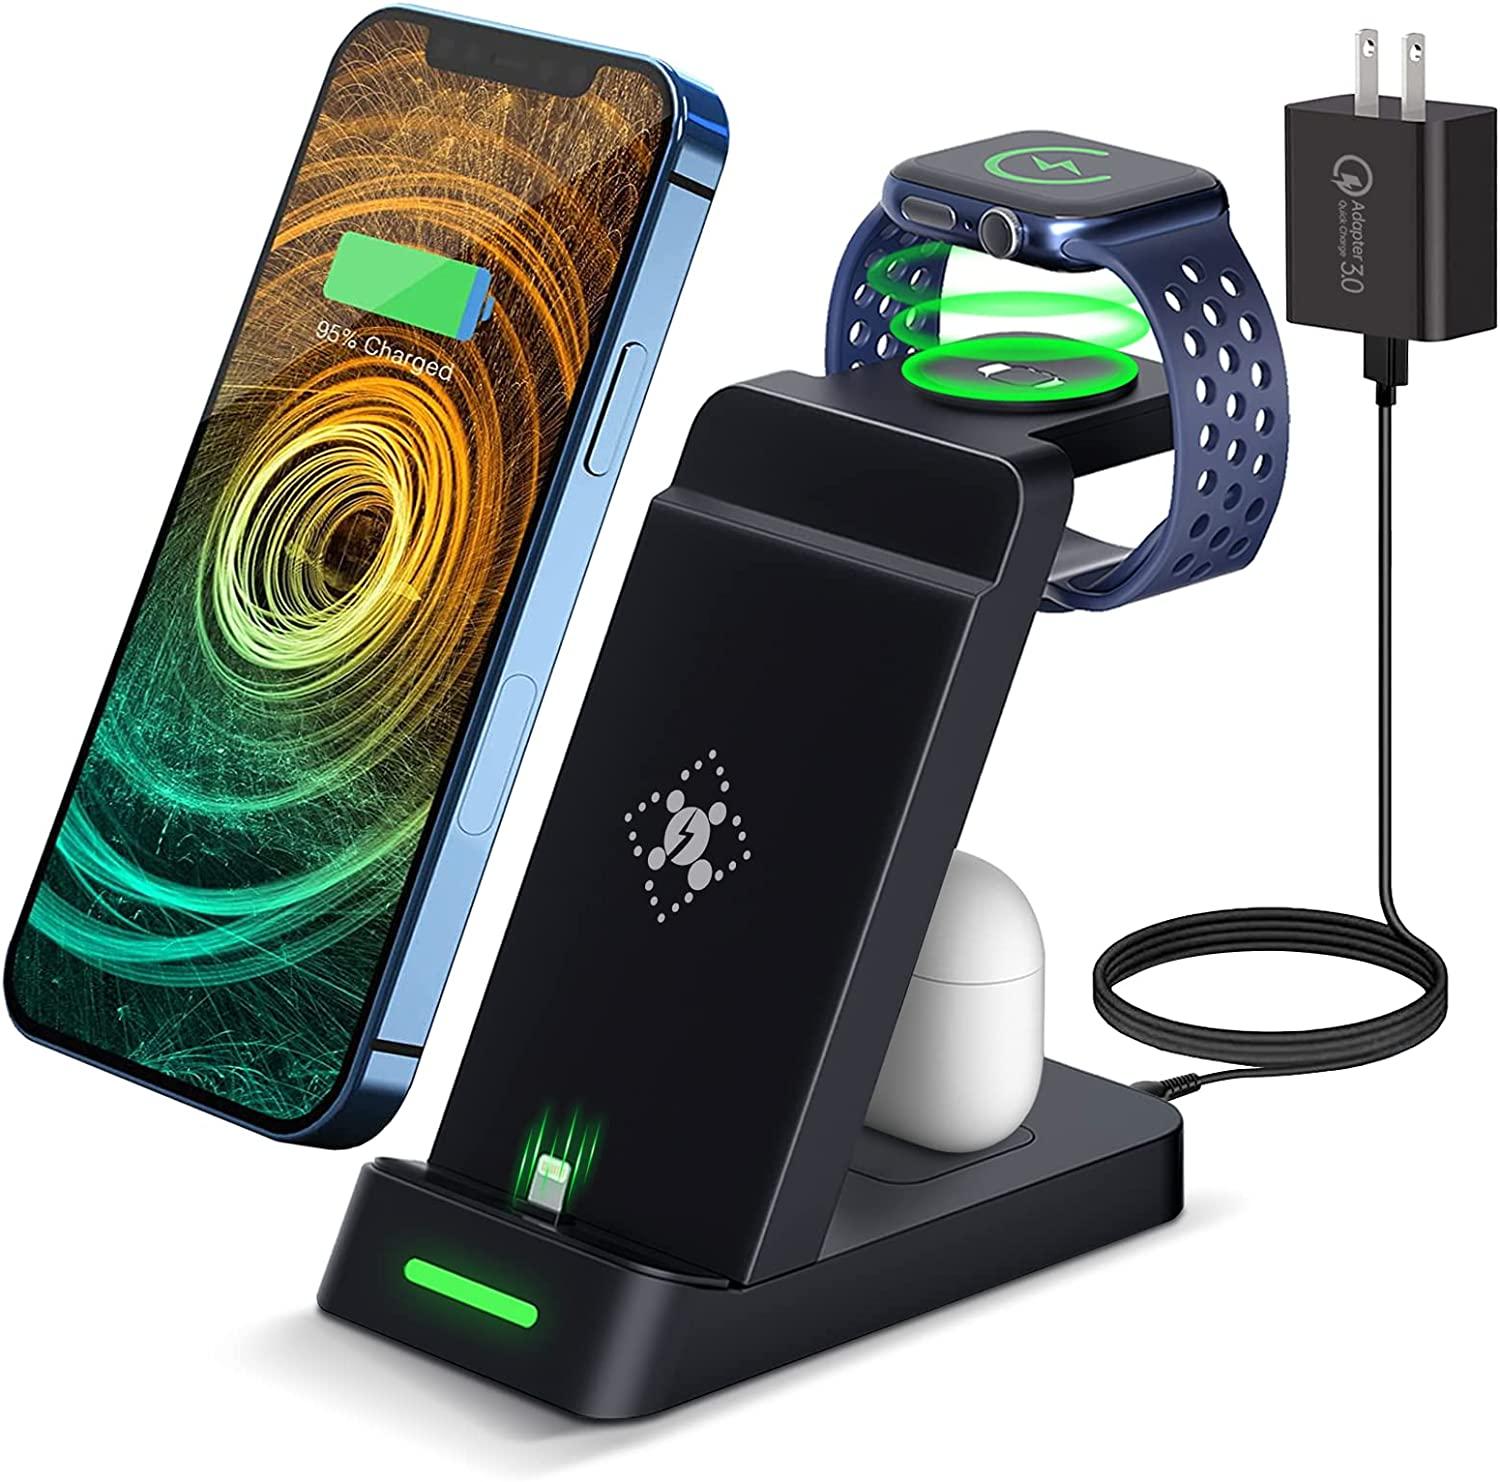 Apple iPhone Watch and AirPods Fast Charging Station Dock Stand for $10.50 Shipped